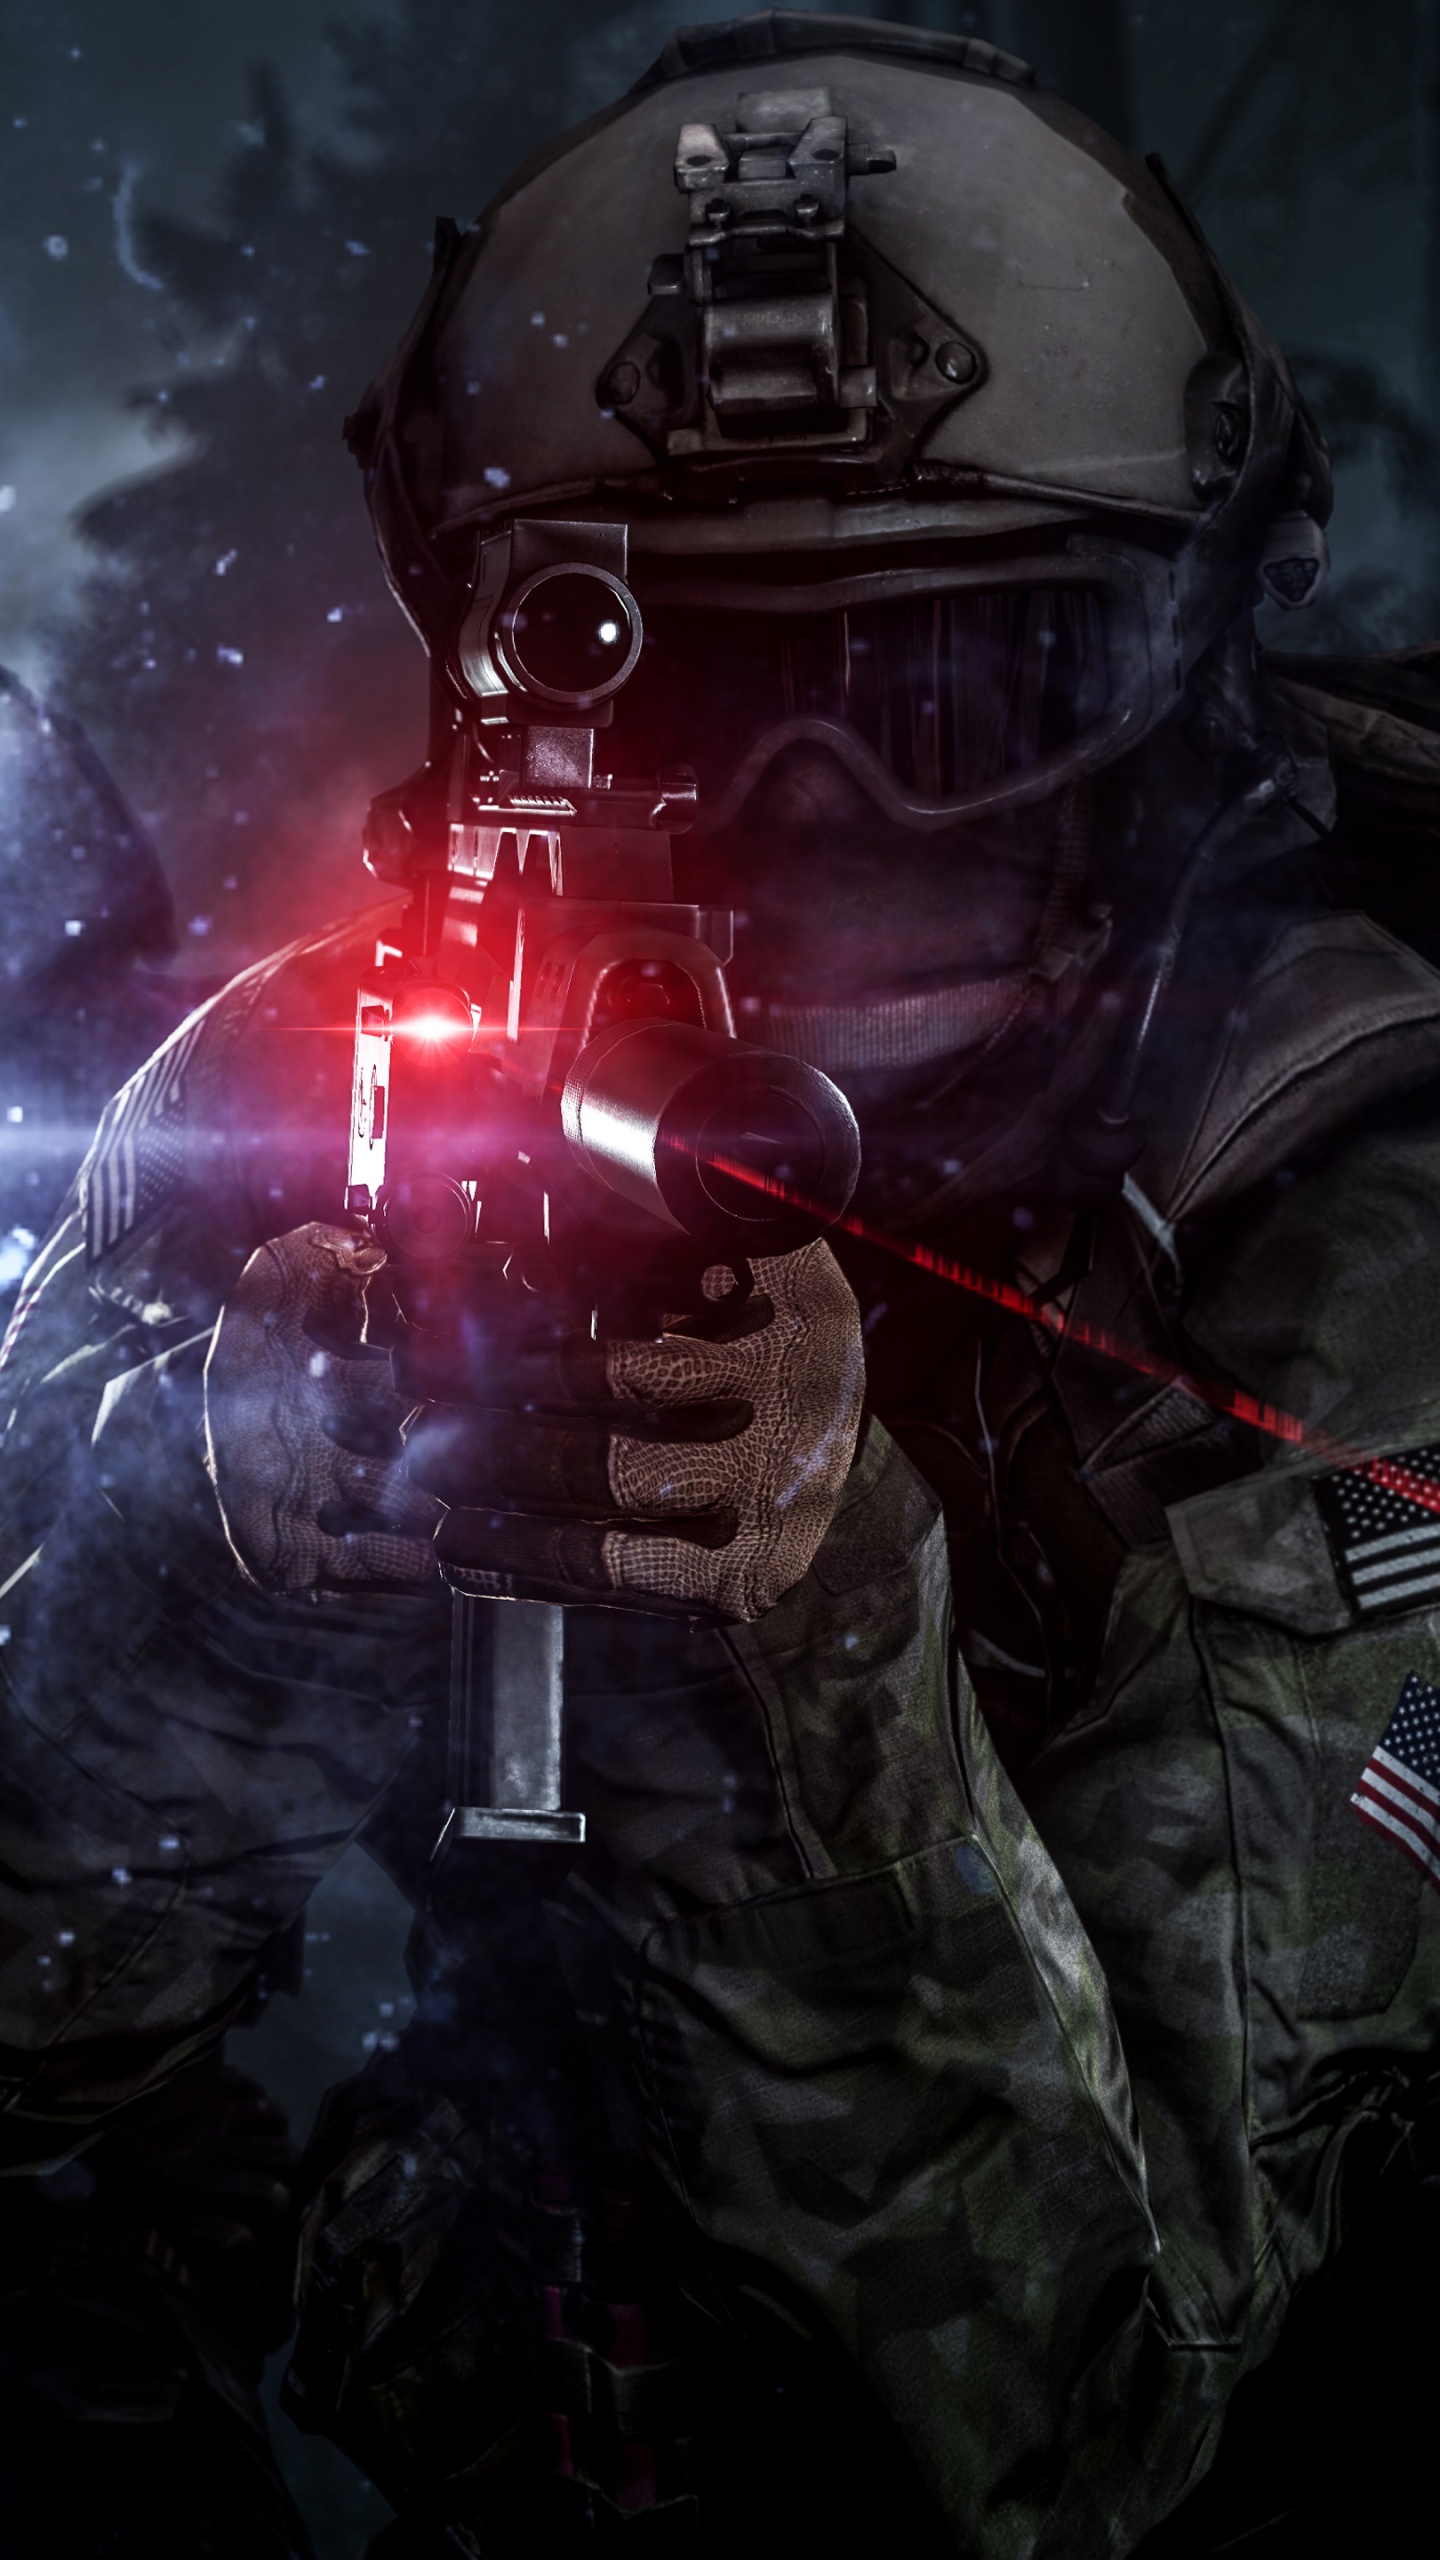 Jeu Pc, Obscurité, Espace, Android, Battlefield 4. Wallpaper in 1440x2560 Resolution